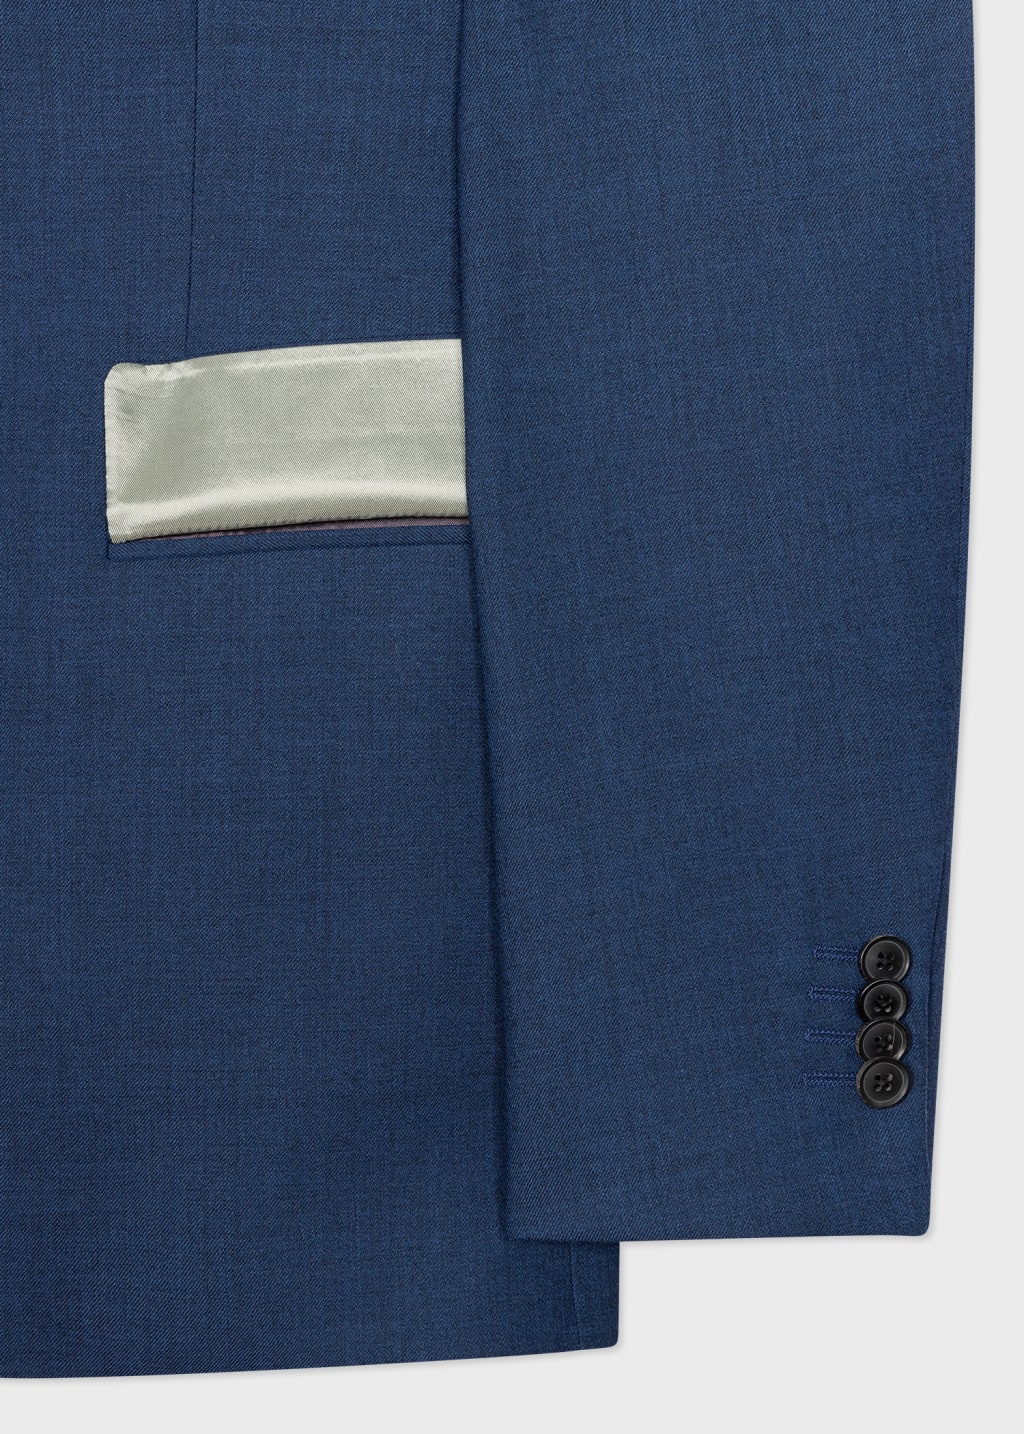 Detail View - The Brierley - Blue Wool 'A Suit To Travel In' Paul Smith